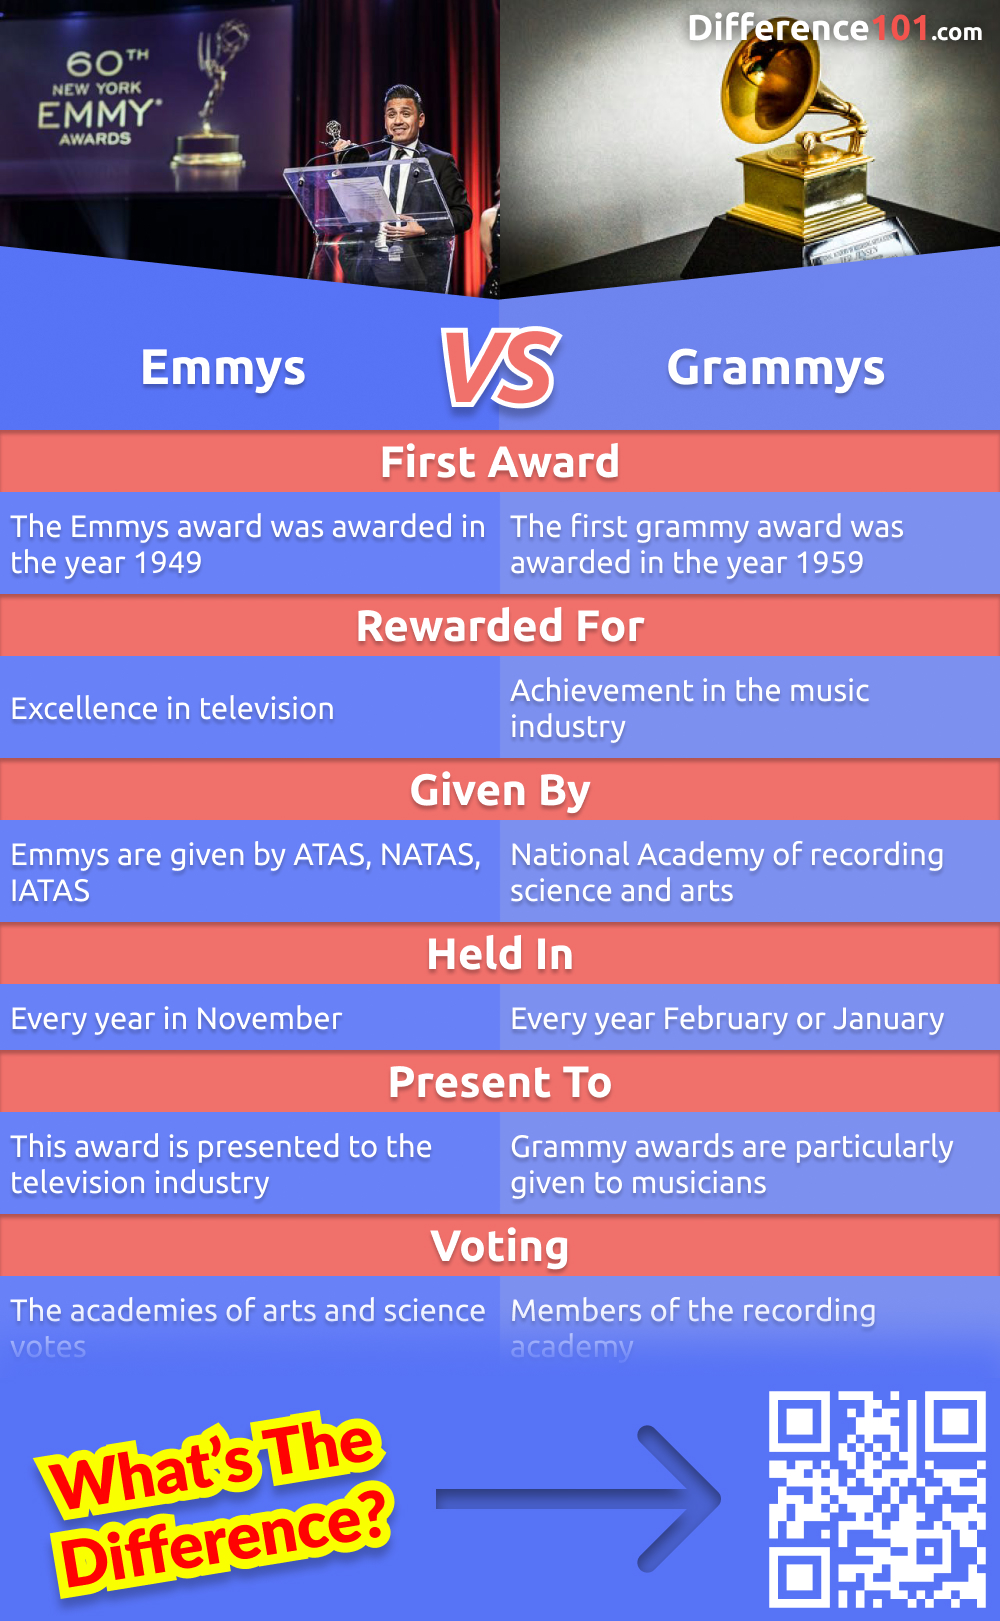 Oscar vs. Golden Globe vs. Emmy vs. Grammy awards - we look at the differences between the four awards shows and which ones are the most prestigious. Read more here.